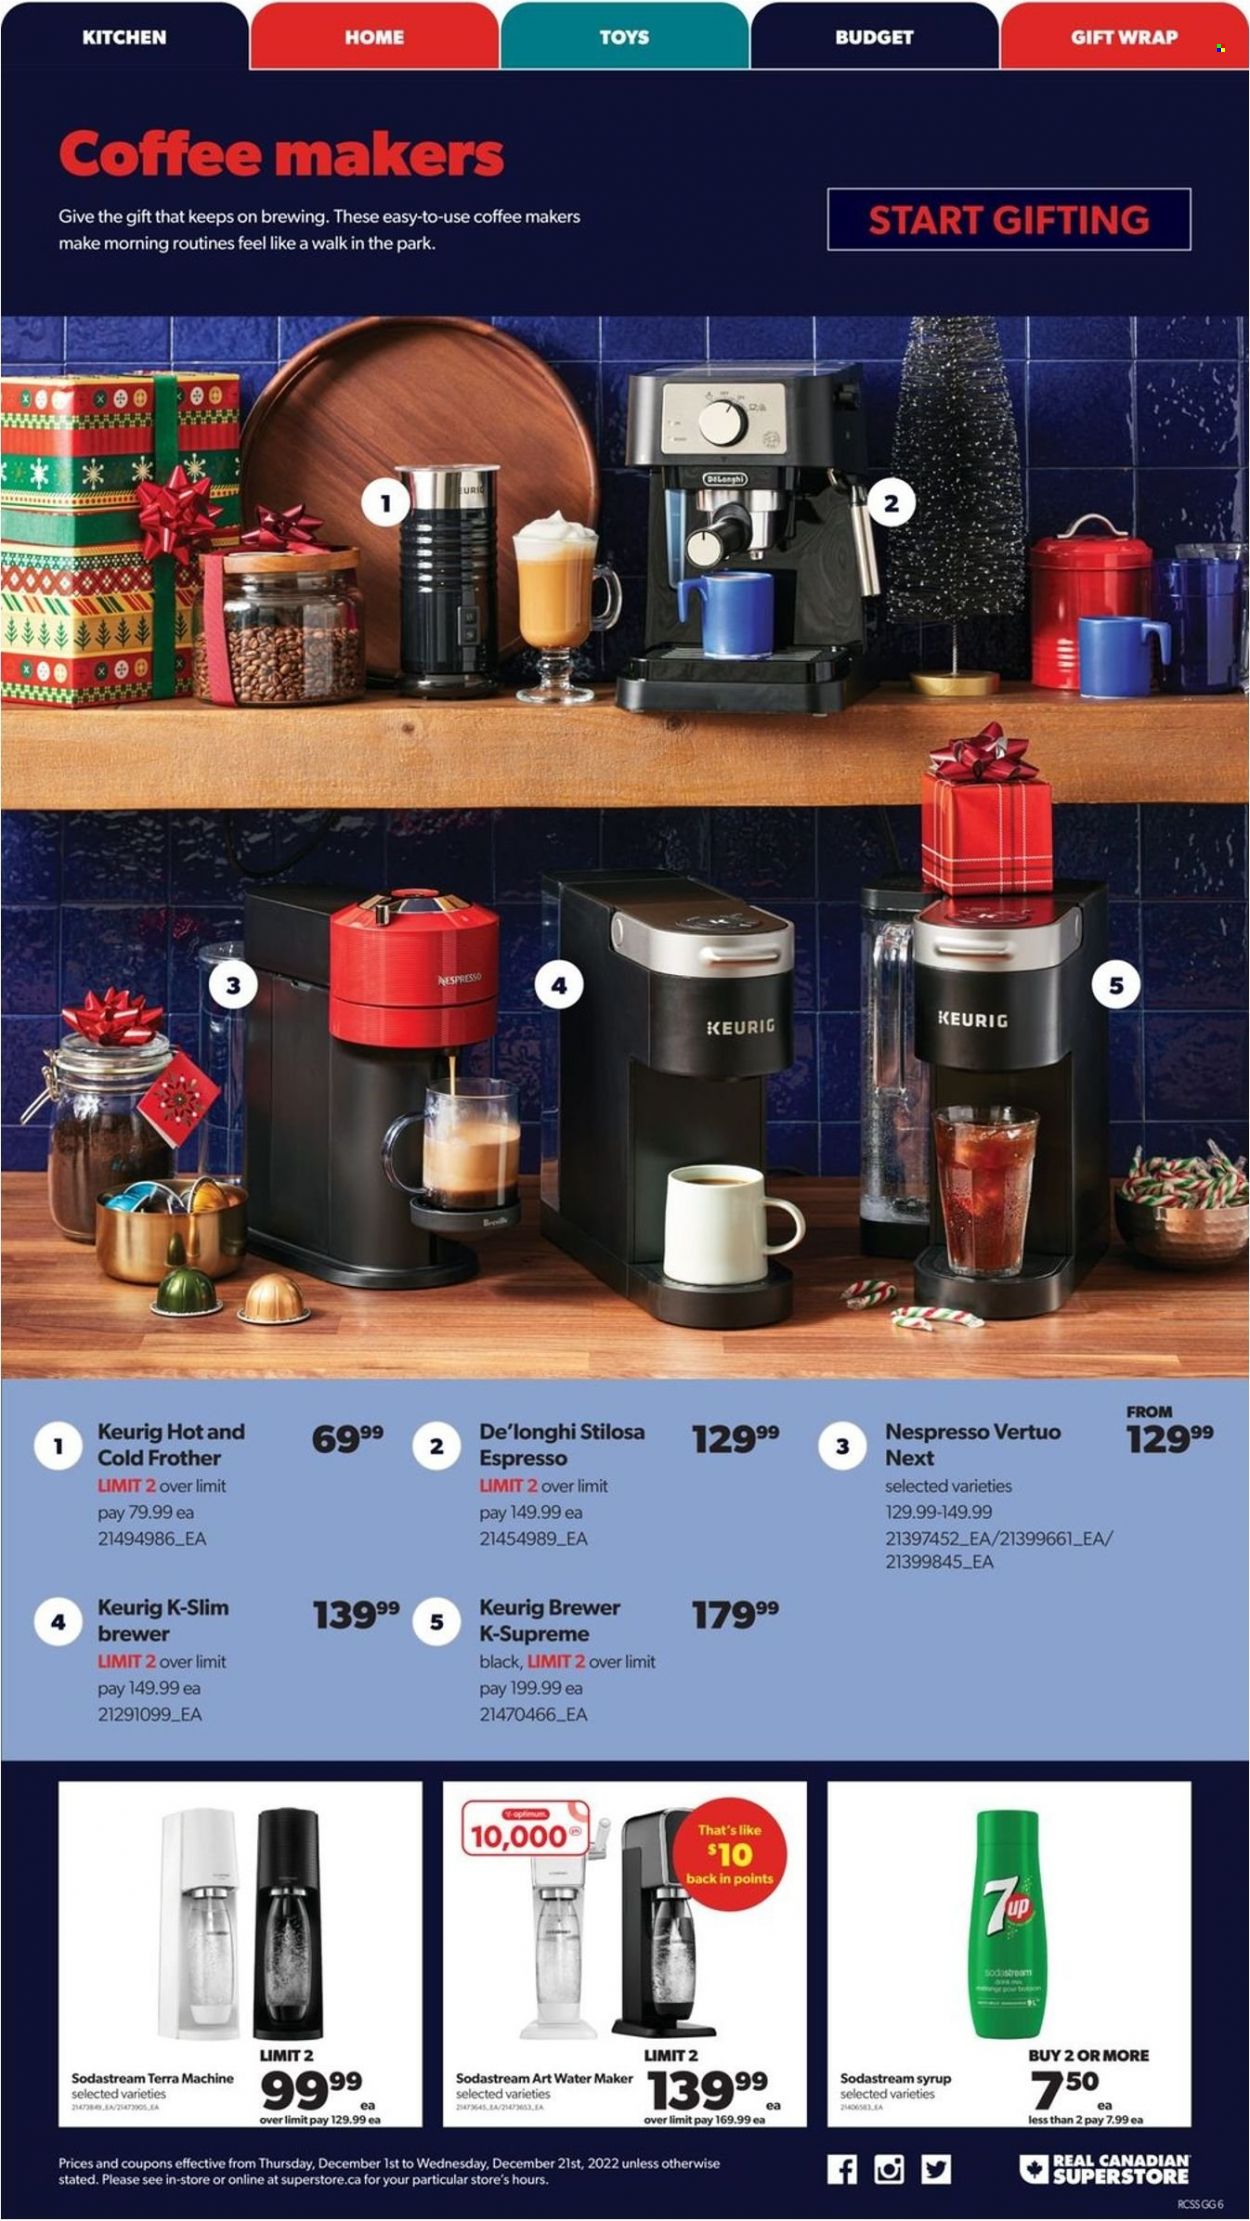 thumbnail - Real Canadian Superstore Flyer - December 01, 2022 - December 21, 2022 - Sales products - brewer, syrup, 7UP, Nespresso, Keurig, SodaStream, gift wrap, Optimum, coffee machine, De'Longhi, water maker, toys. Page 6.